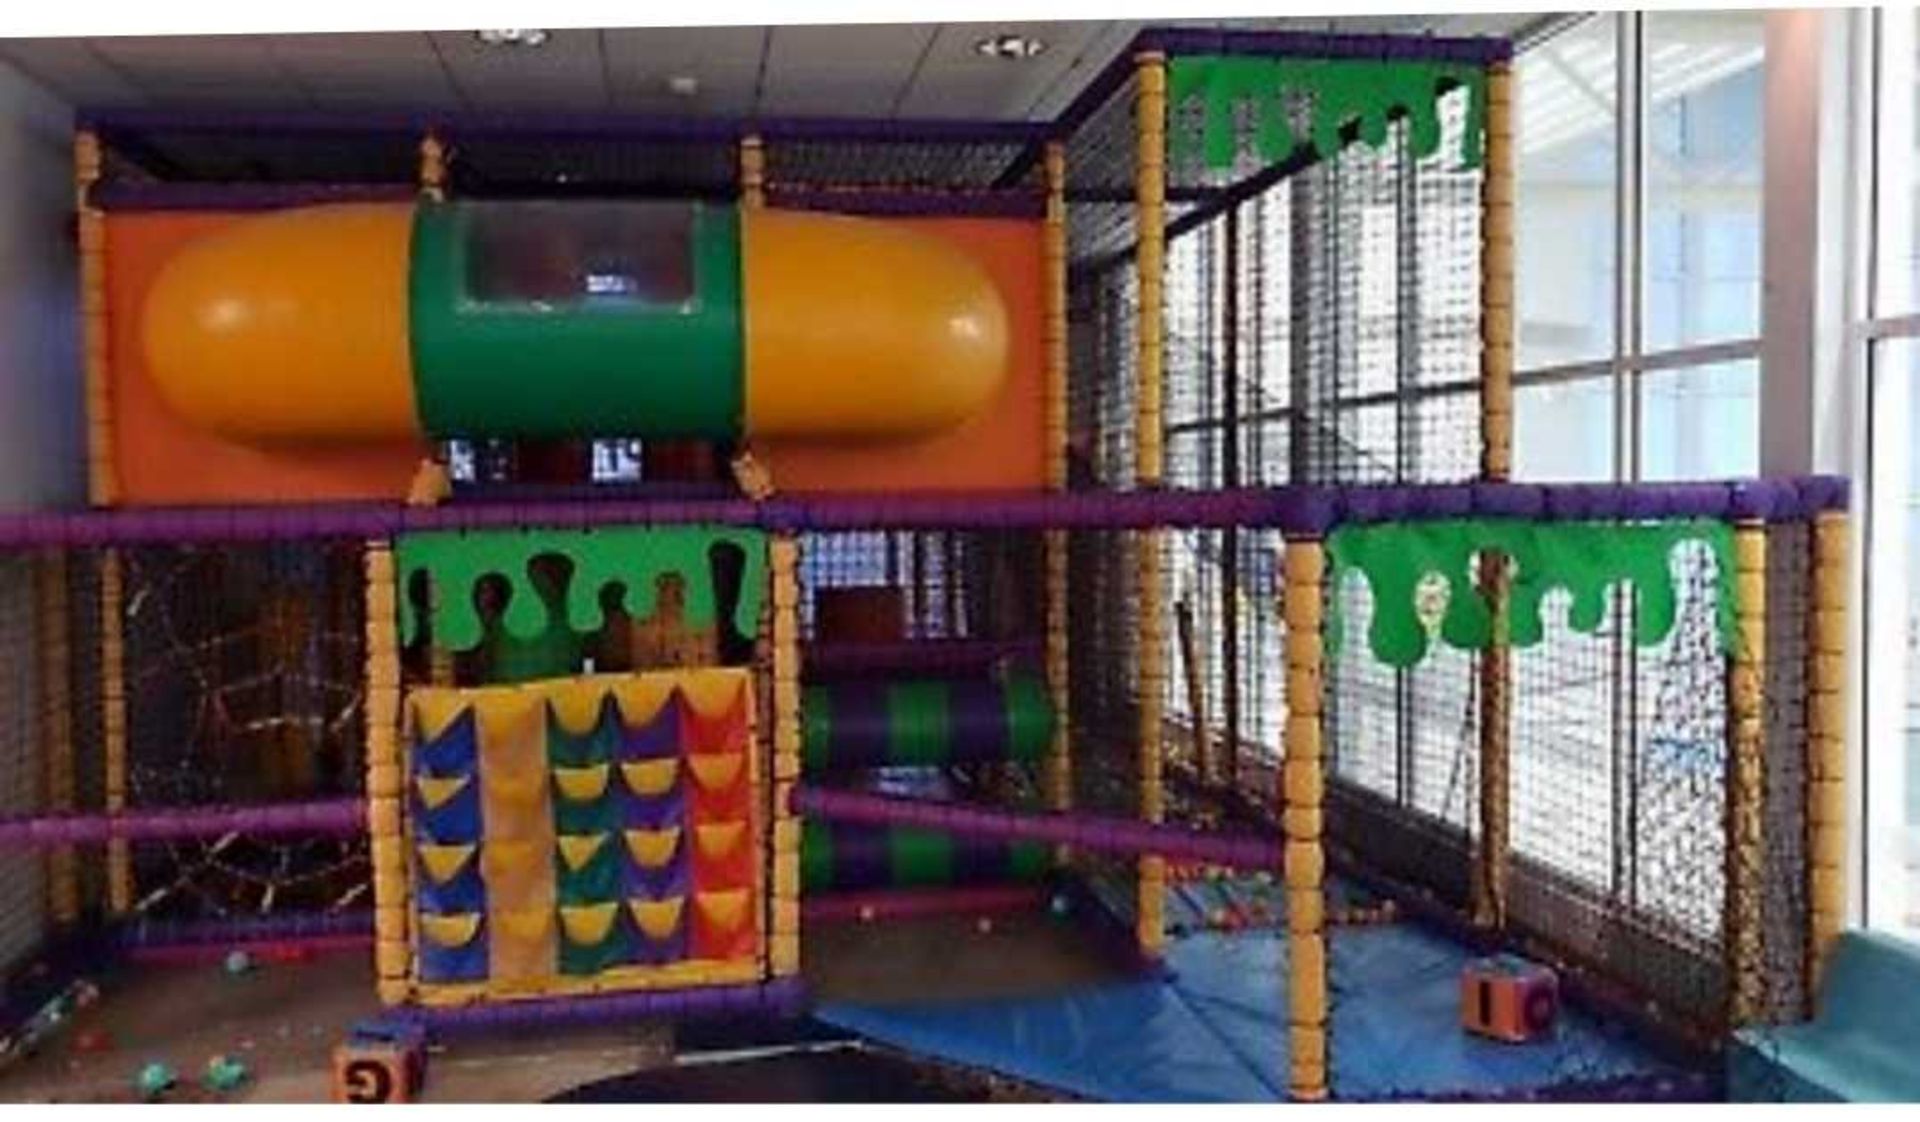 Play gym business